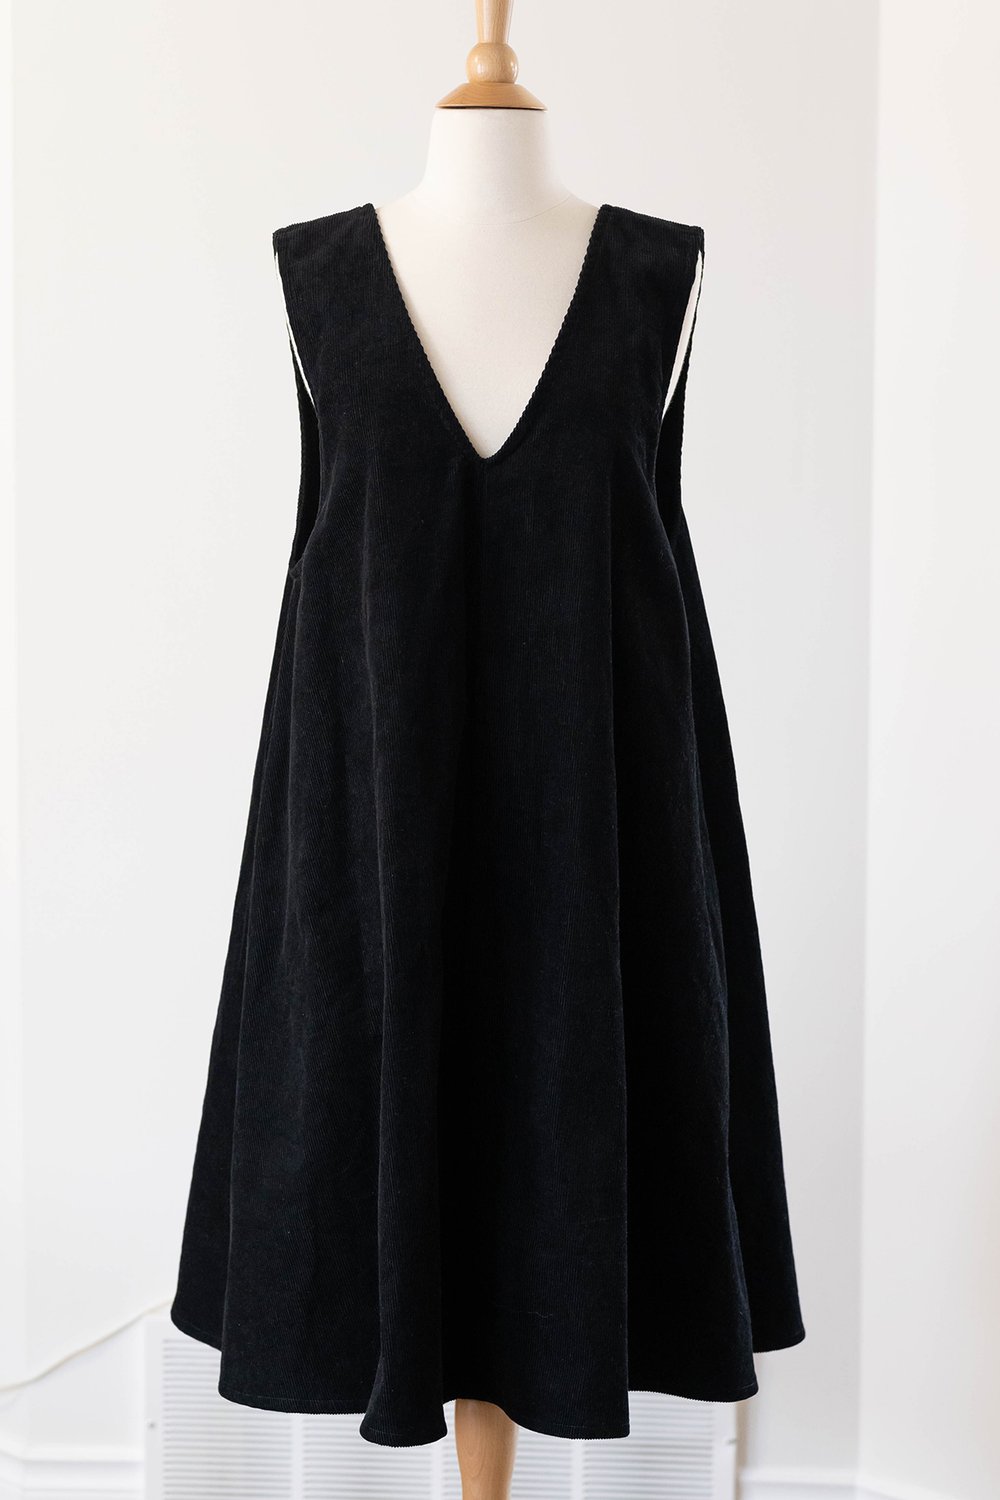 A pinafore with black corduroy fabric